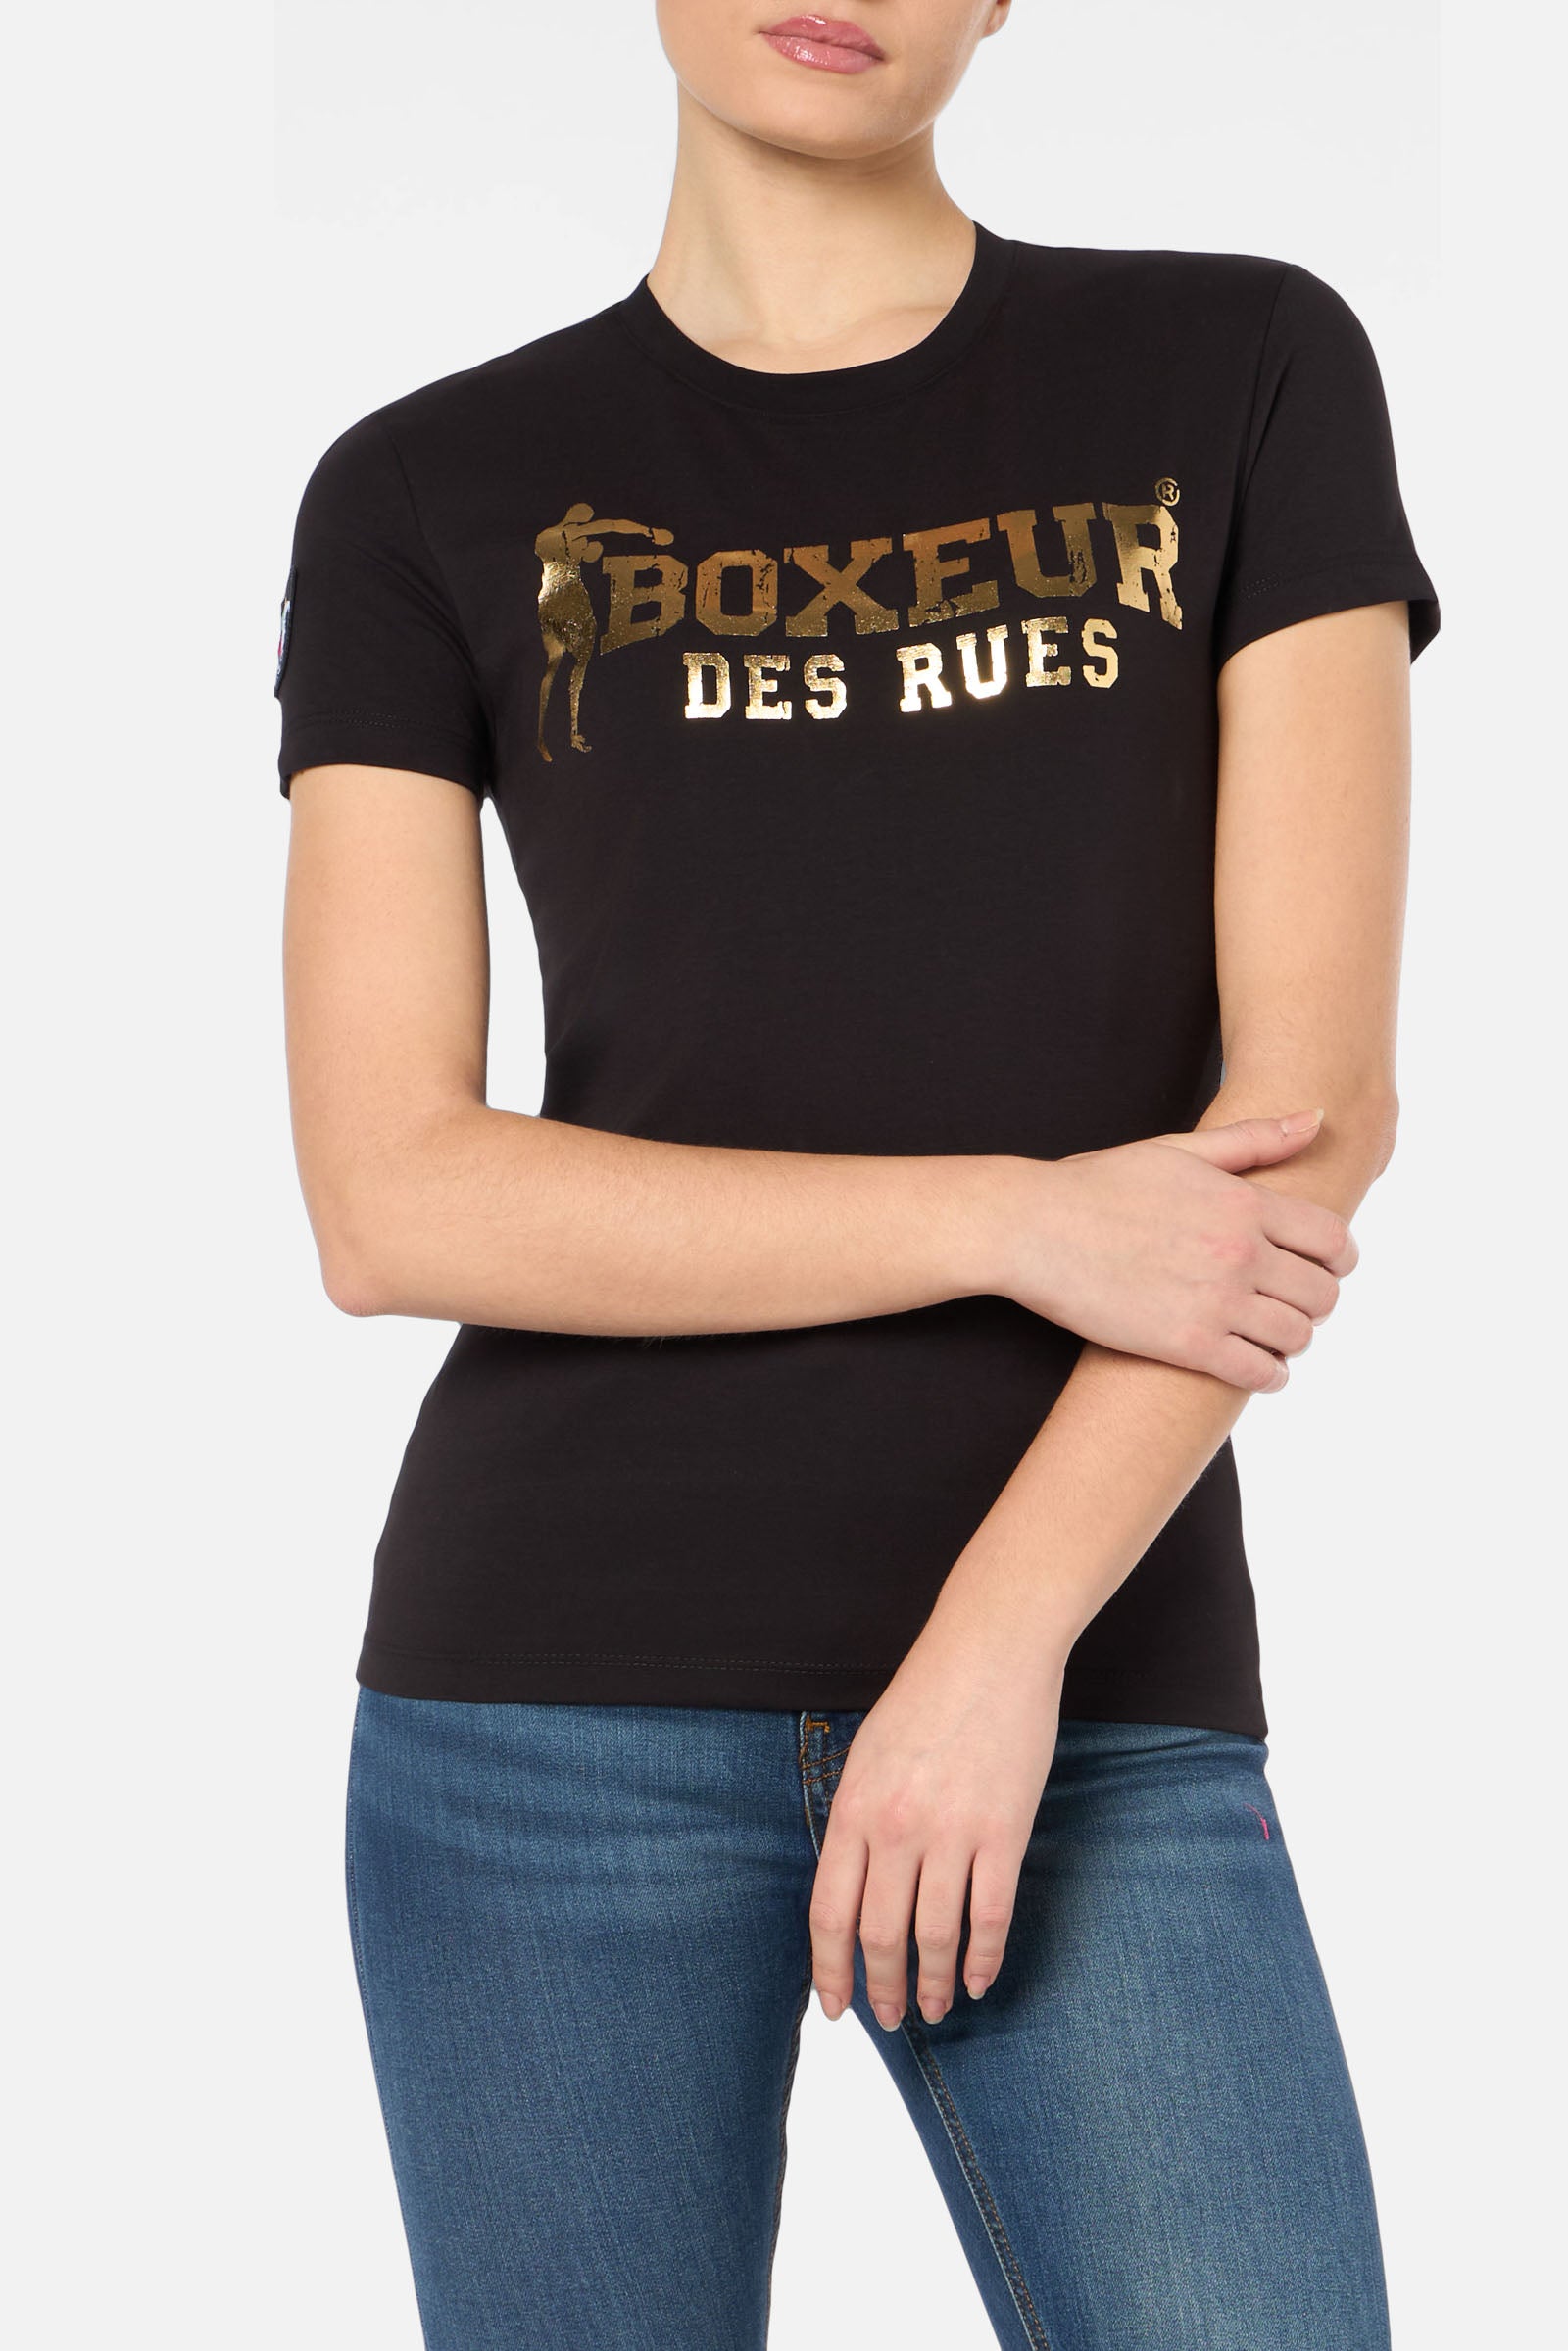 Iconic Logo Tee in Black-Gold T-Shirts Boxeur des Rues   